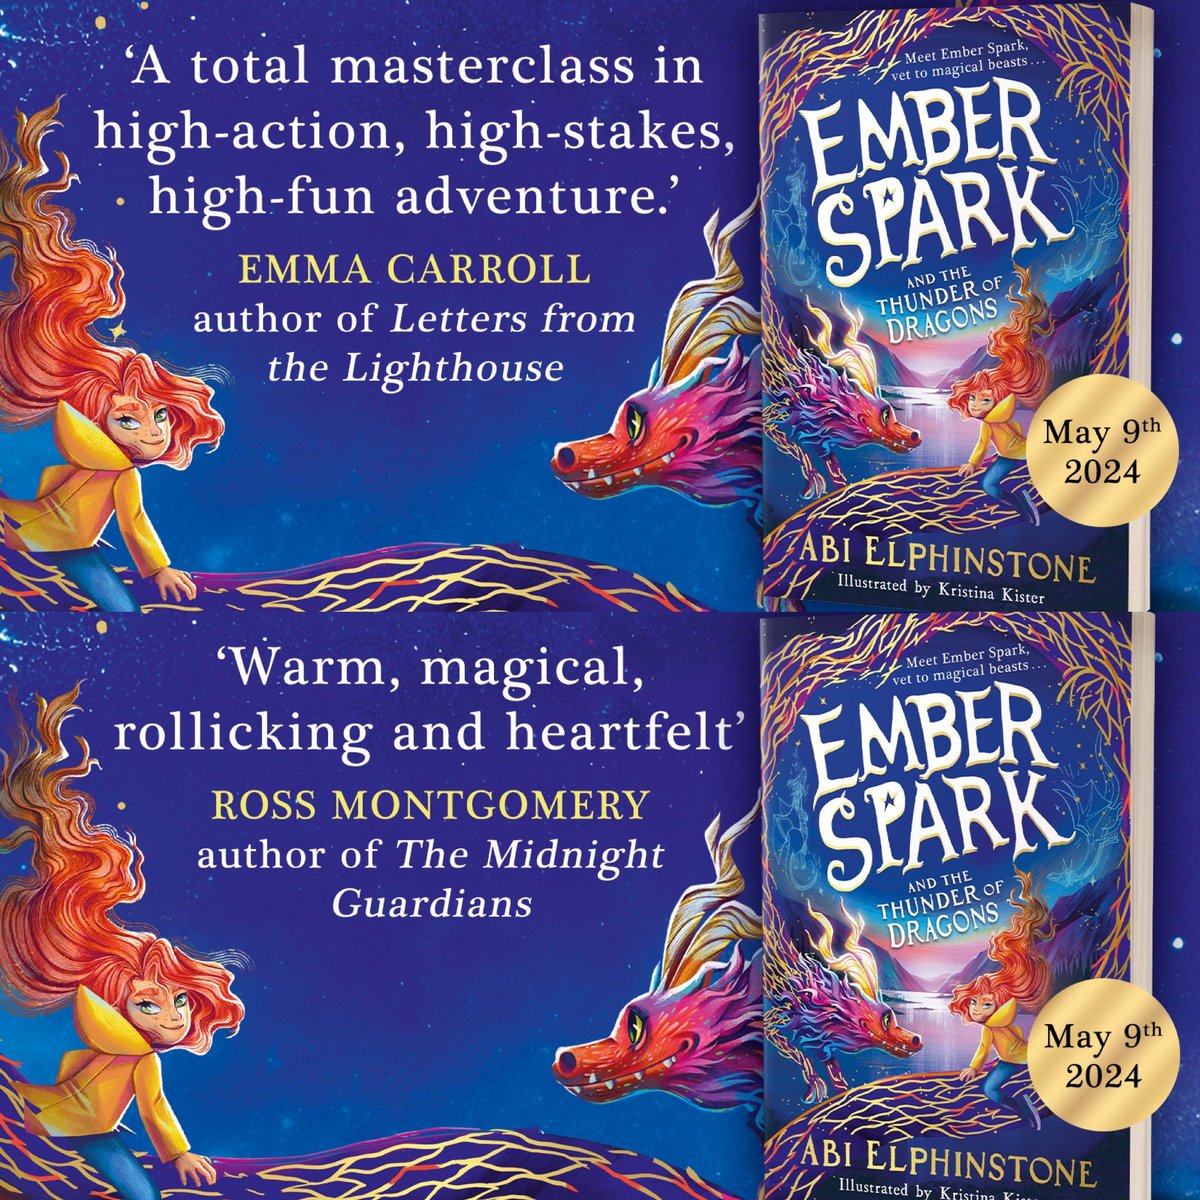 Two of my favourite children’s authors - @emcarrollauthor and @mossmontmomery - have said some very lovely things about EMBER SPARK 💚🐉💚 Emma’s new book, THE HOUDINI INHERITANCE, comes out this summer, as does Ross’ REBEL. Both are excellent.